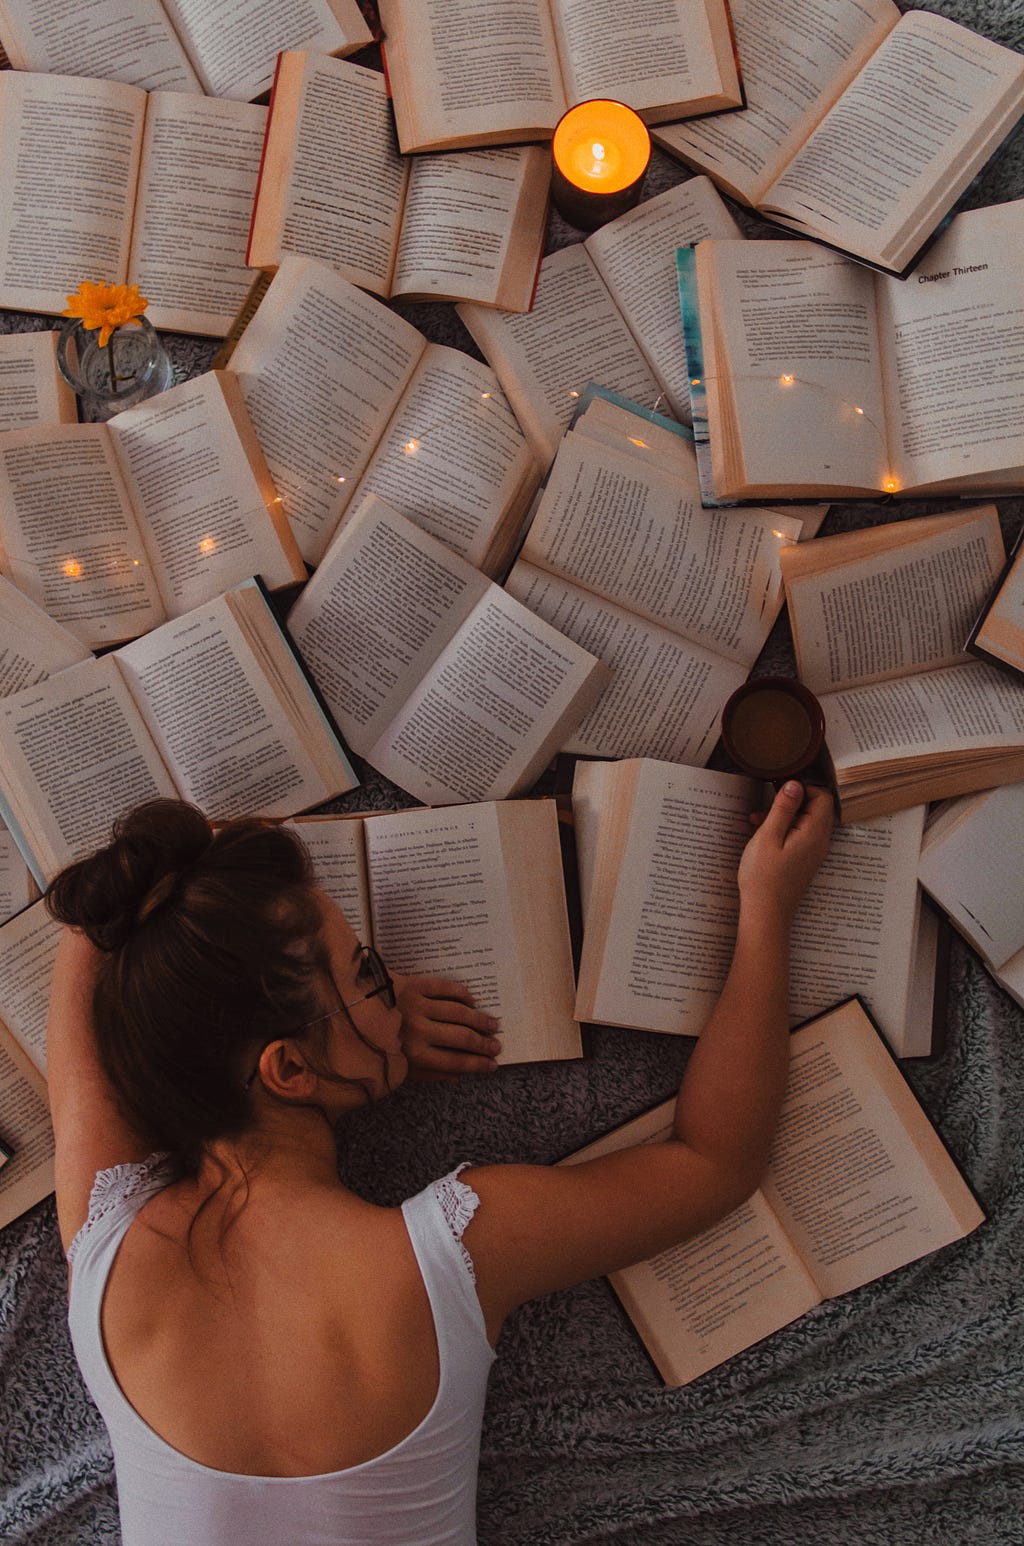 A girl lying on a pile of open books.